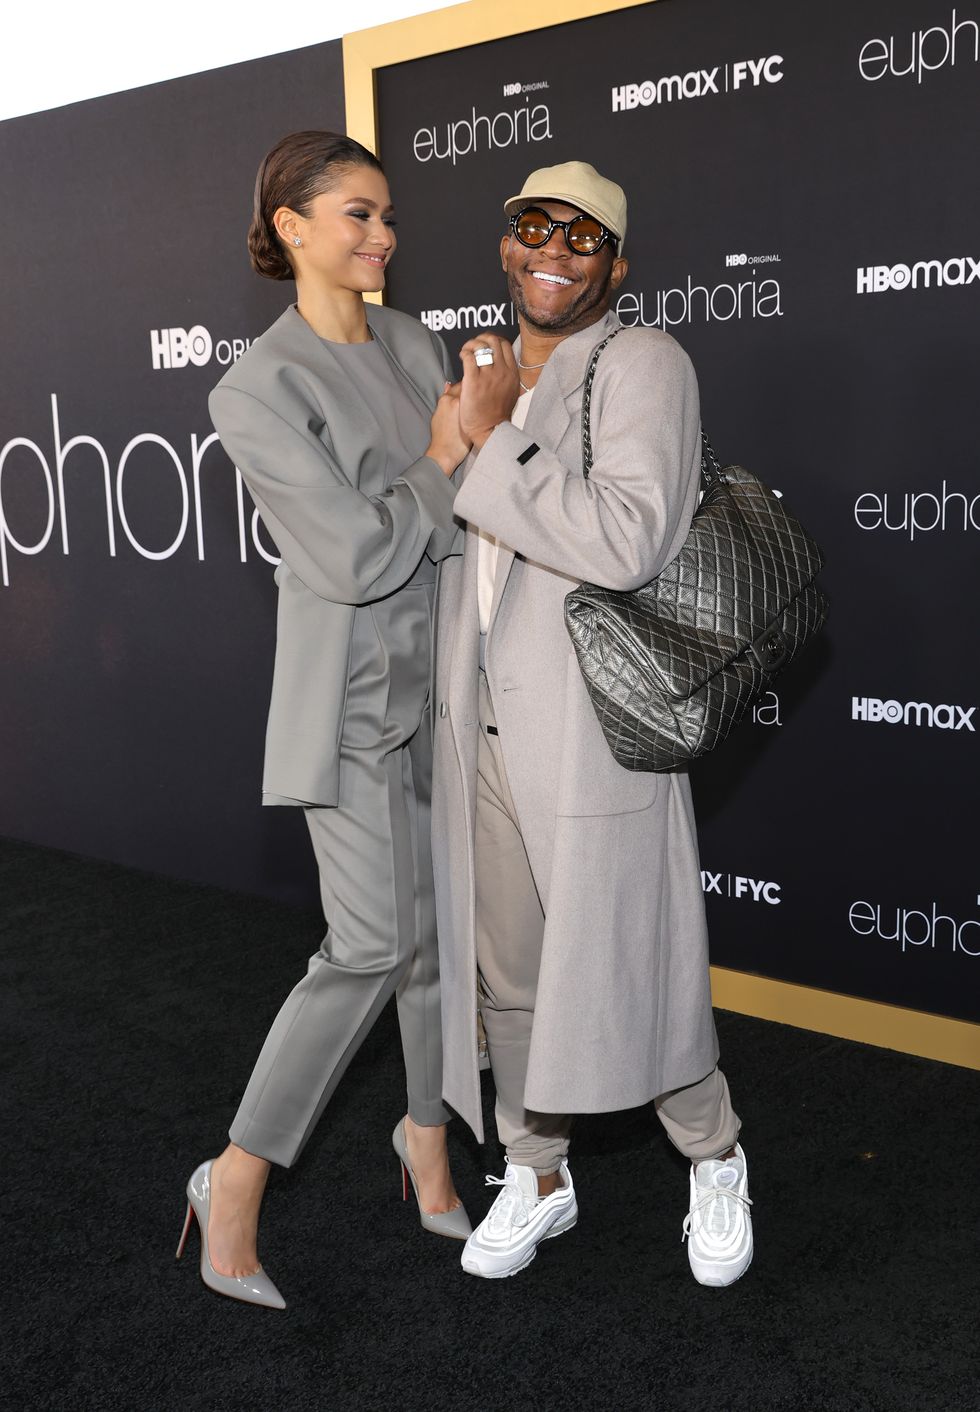 hbo max fyc event for euphoria red carpet